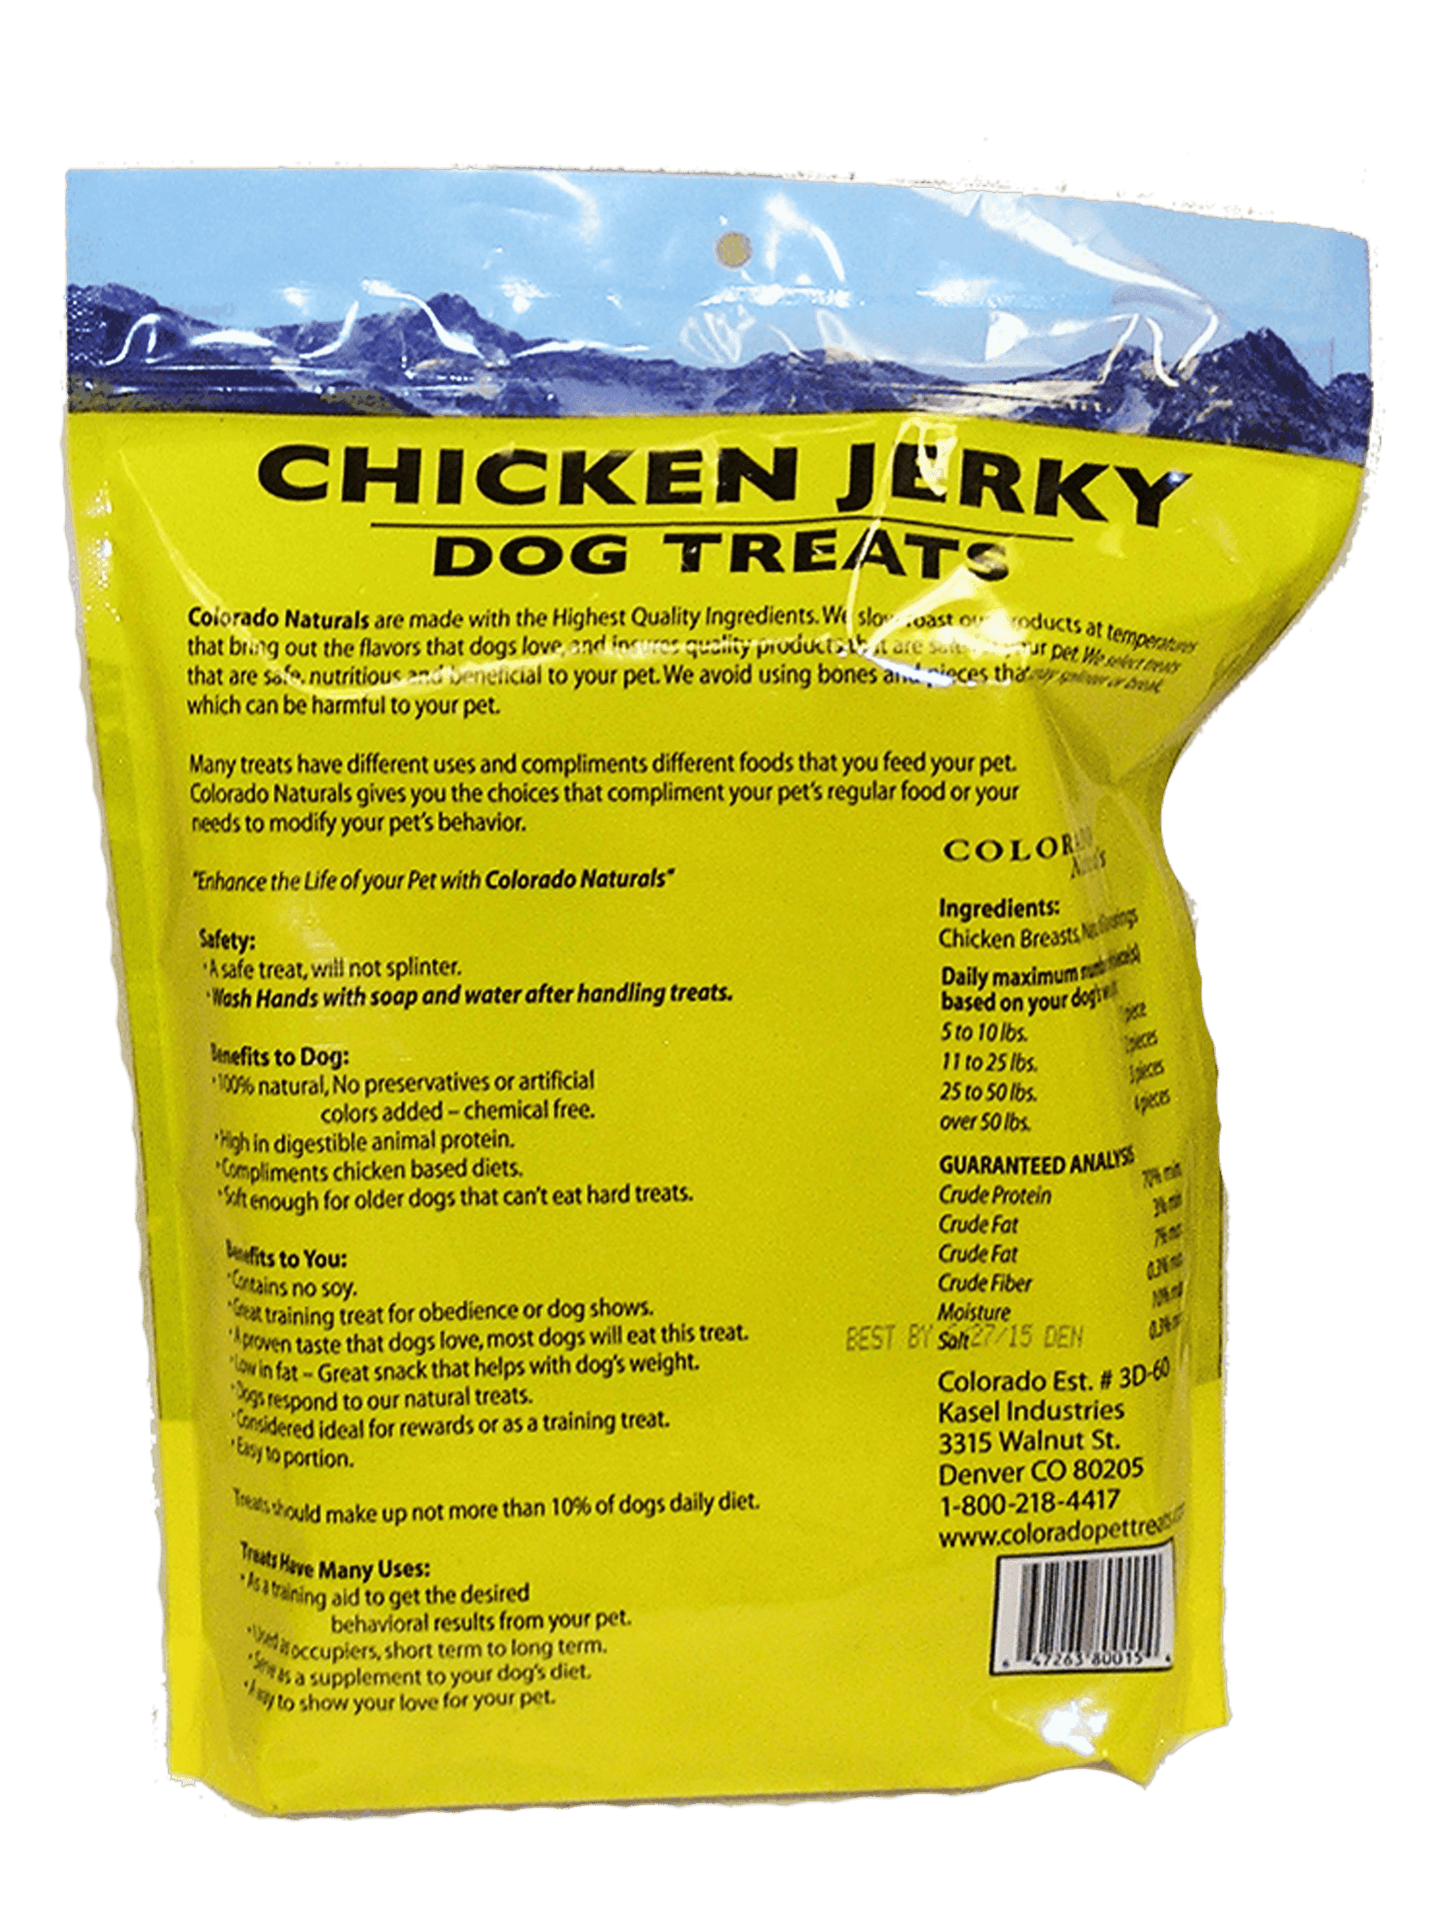 A photo of the back of the best 16 oz Chicken Jerky Dog Treats from Colorado Pet Treats by Colorado Naturals. Colorado Pet Treats - All-Natural, All-American Dog Jerky, Jerky Chips, and Bones - Treat your furry friend to our delicious and healthy pet treats made with only the finest ingredients sourced in the USA. Delicious and chewy all-American dog jerky made with natural ingredients sourced in Colorado.